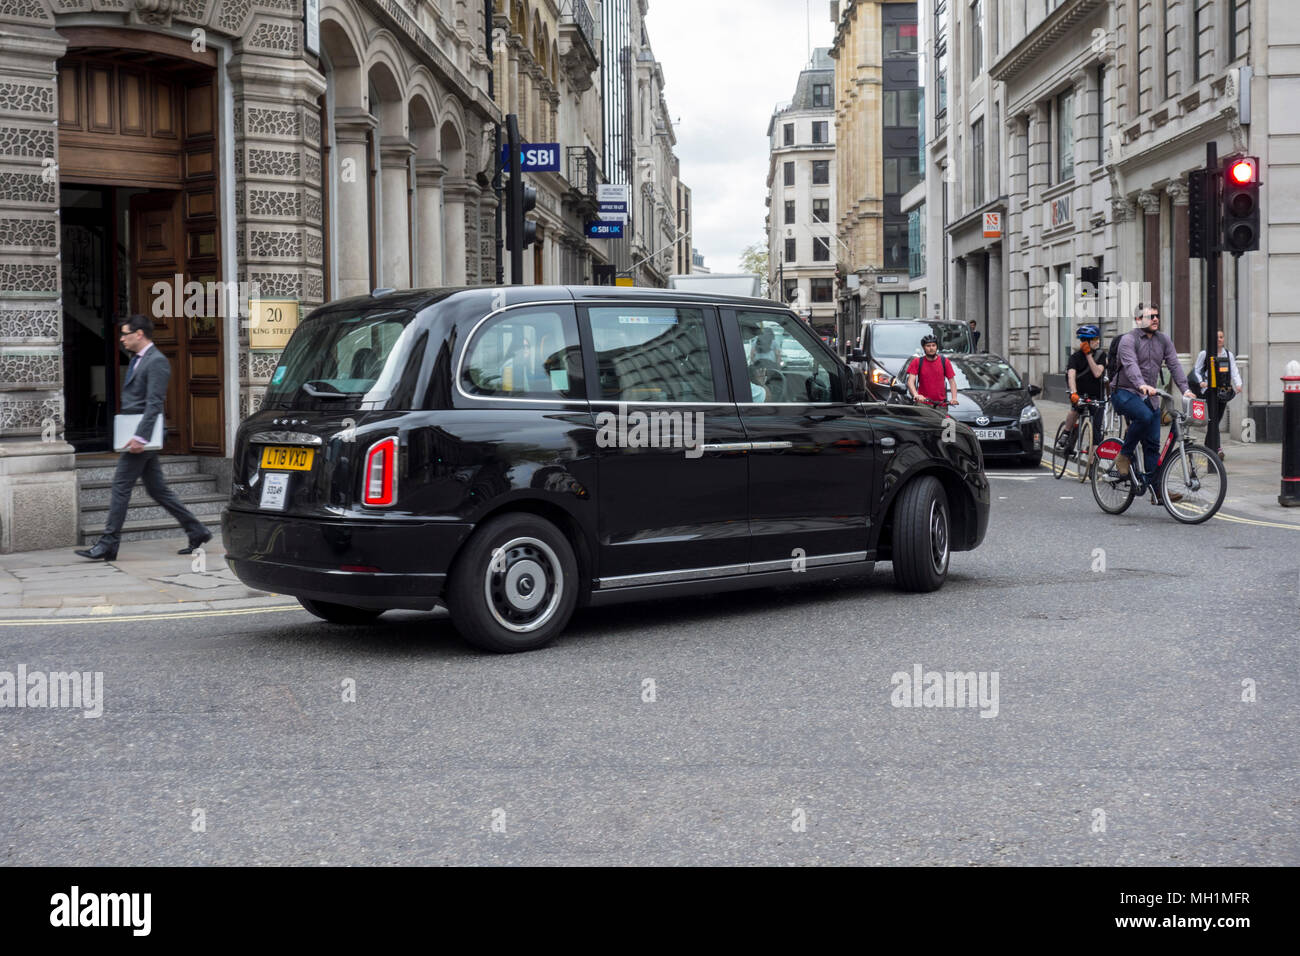 New TX electric London Taxi by London Electric Vehicle Company (LEVC), UK Stock Photo